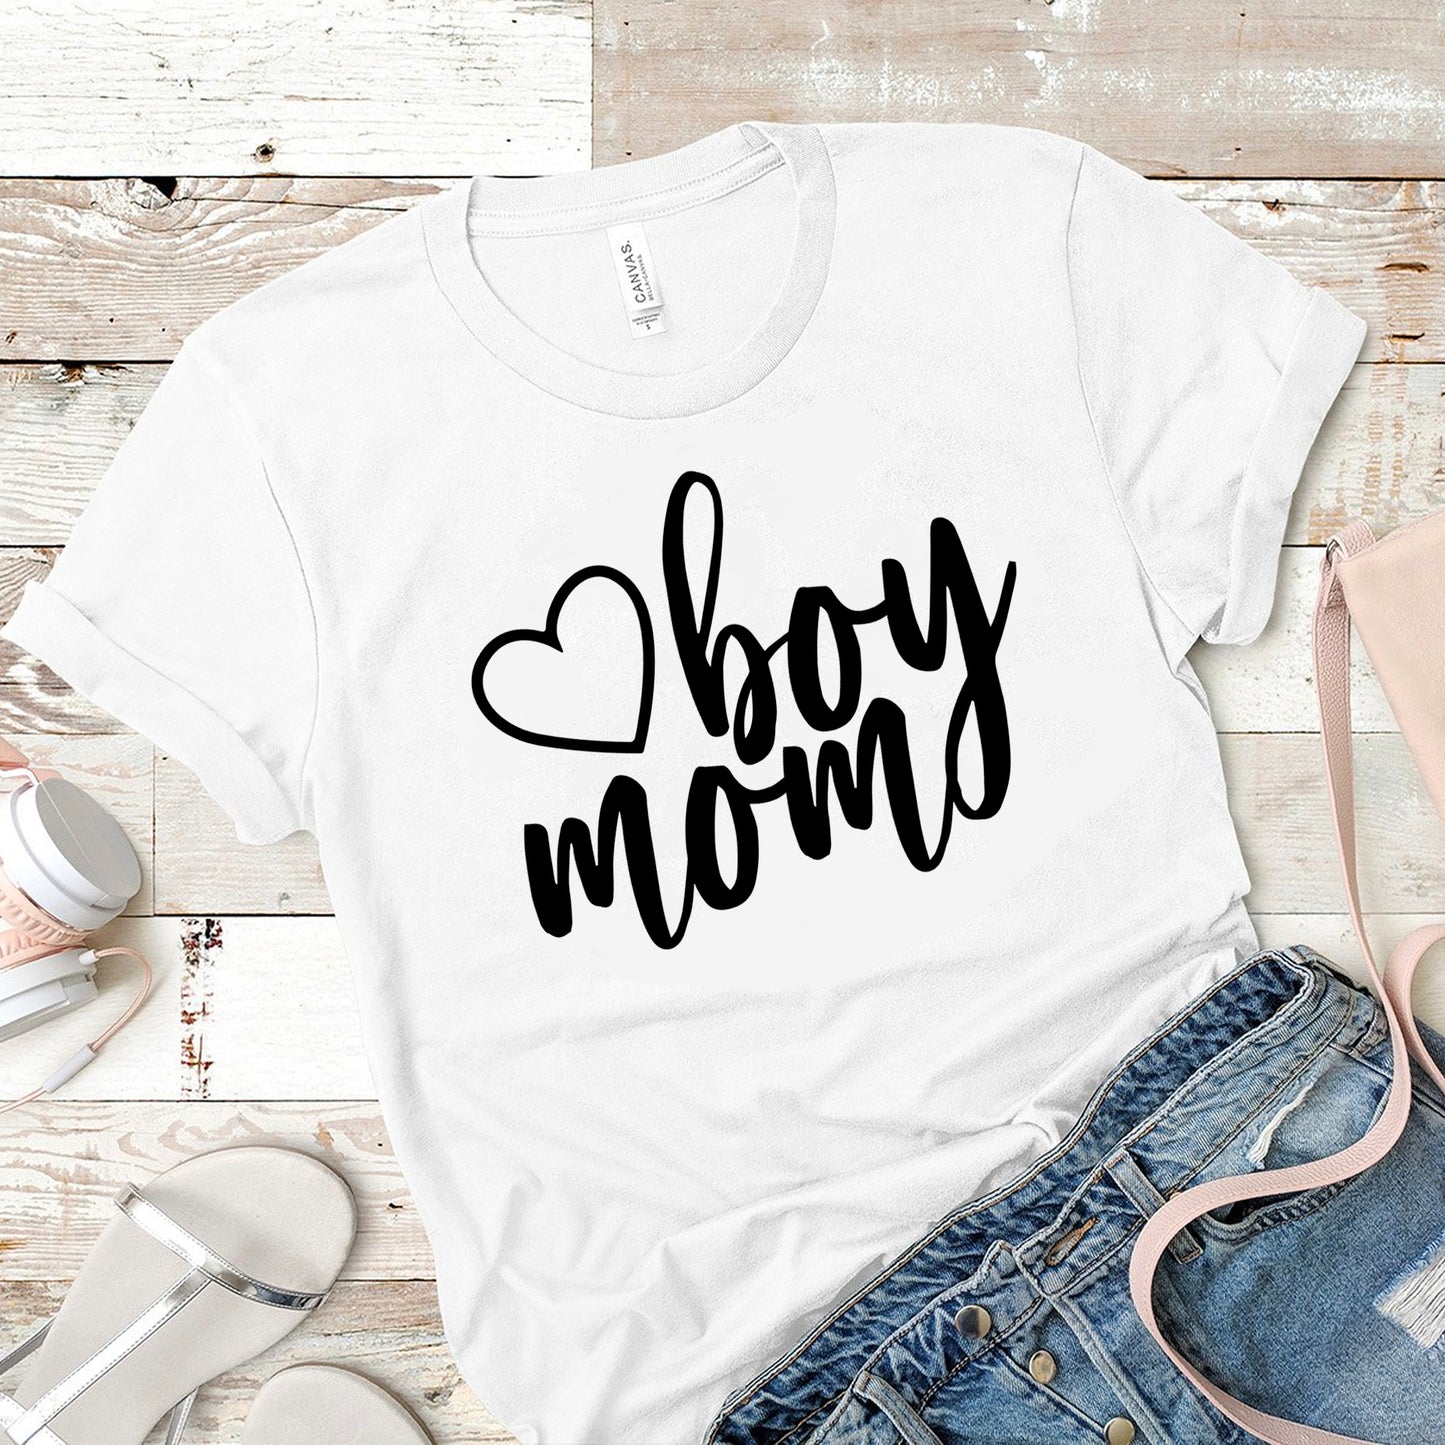 Boy Mom Heart Outline Graphic Tee, White